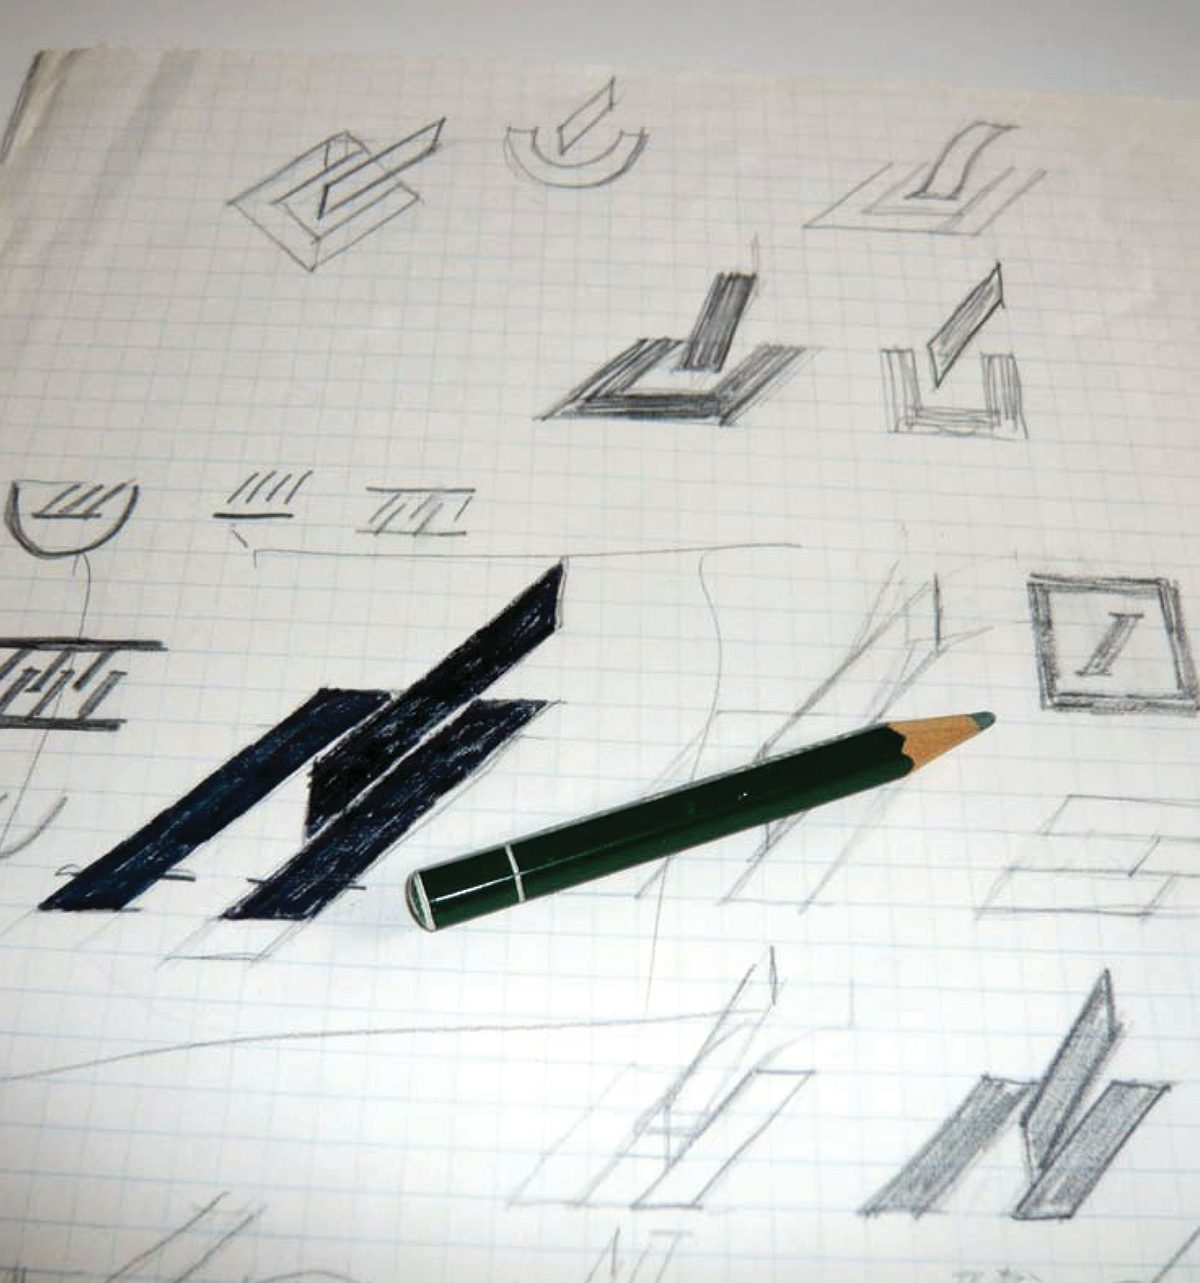 Initial sketches for the Deutsche Bank logo competition